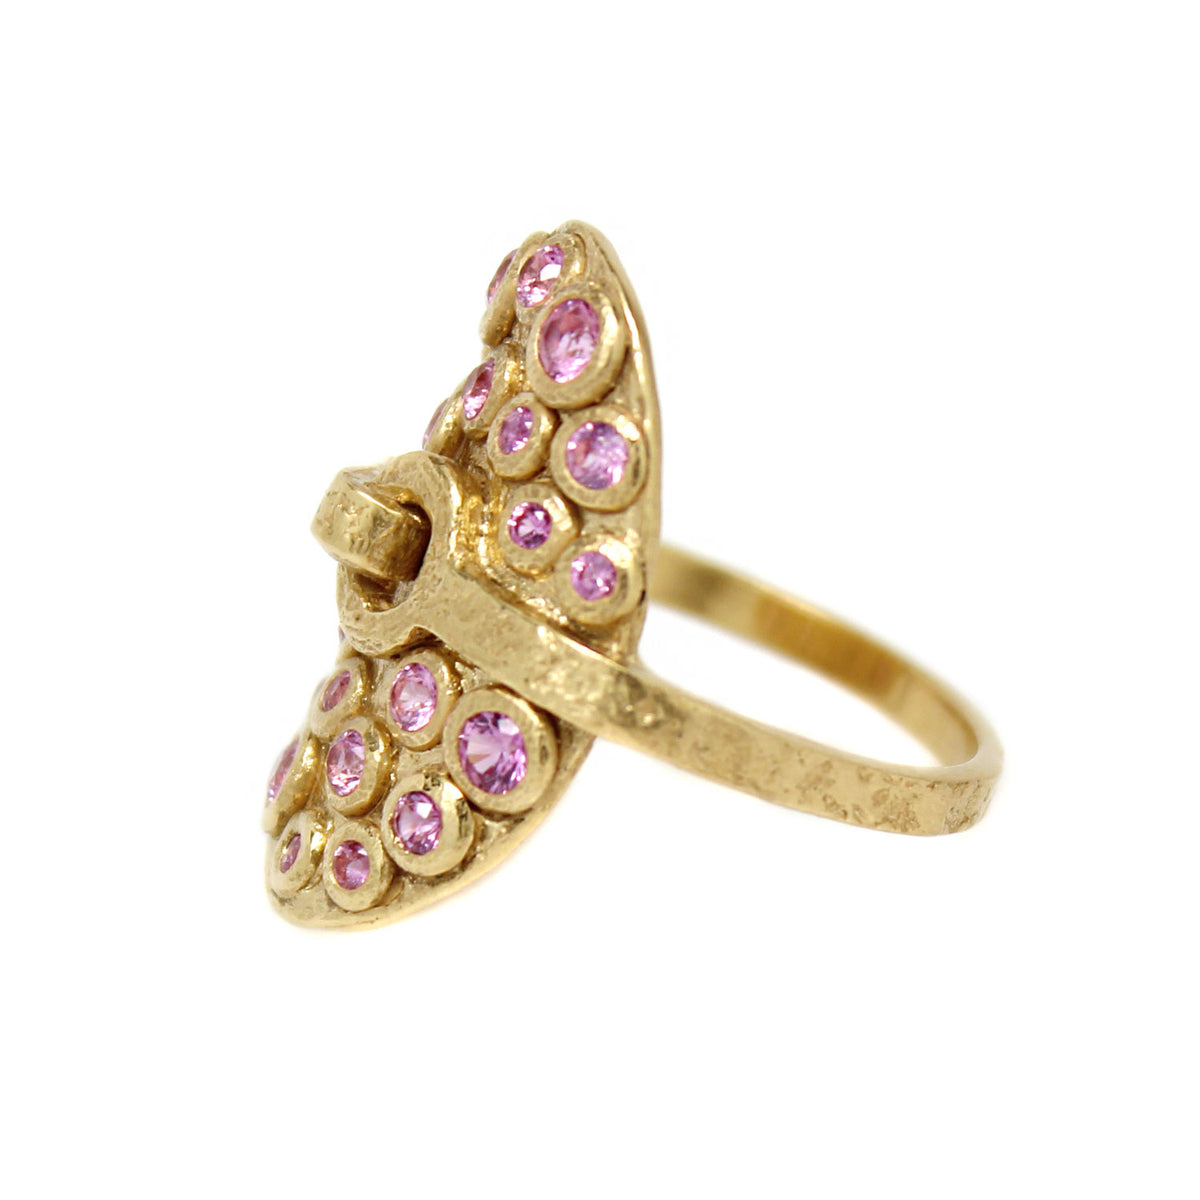 One-of-a-Kind Strapped Ring with Pink Tourmaline